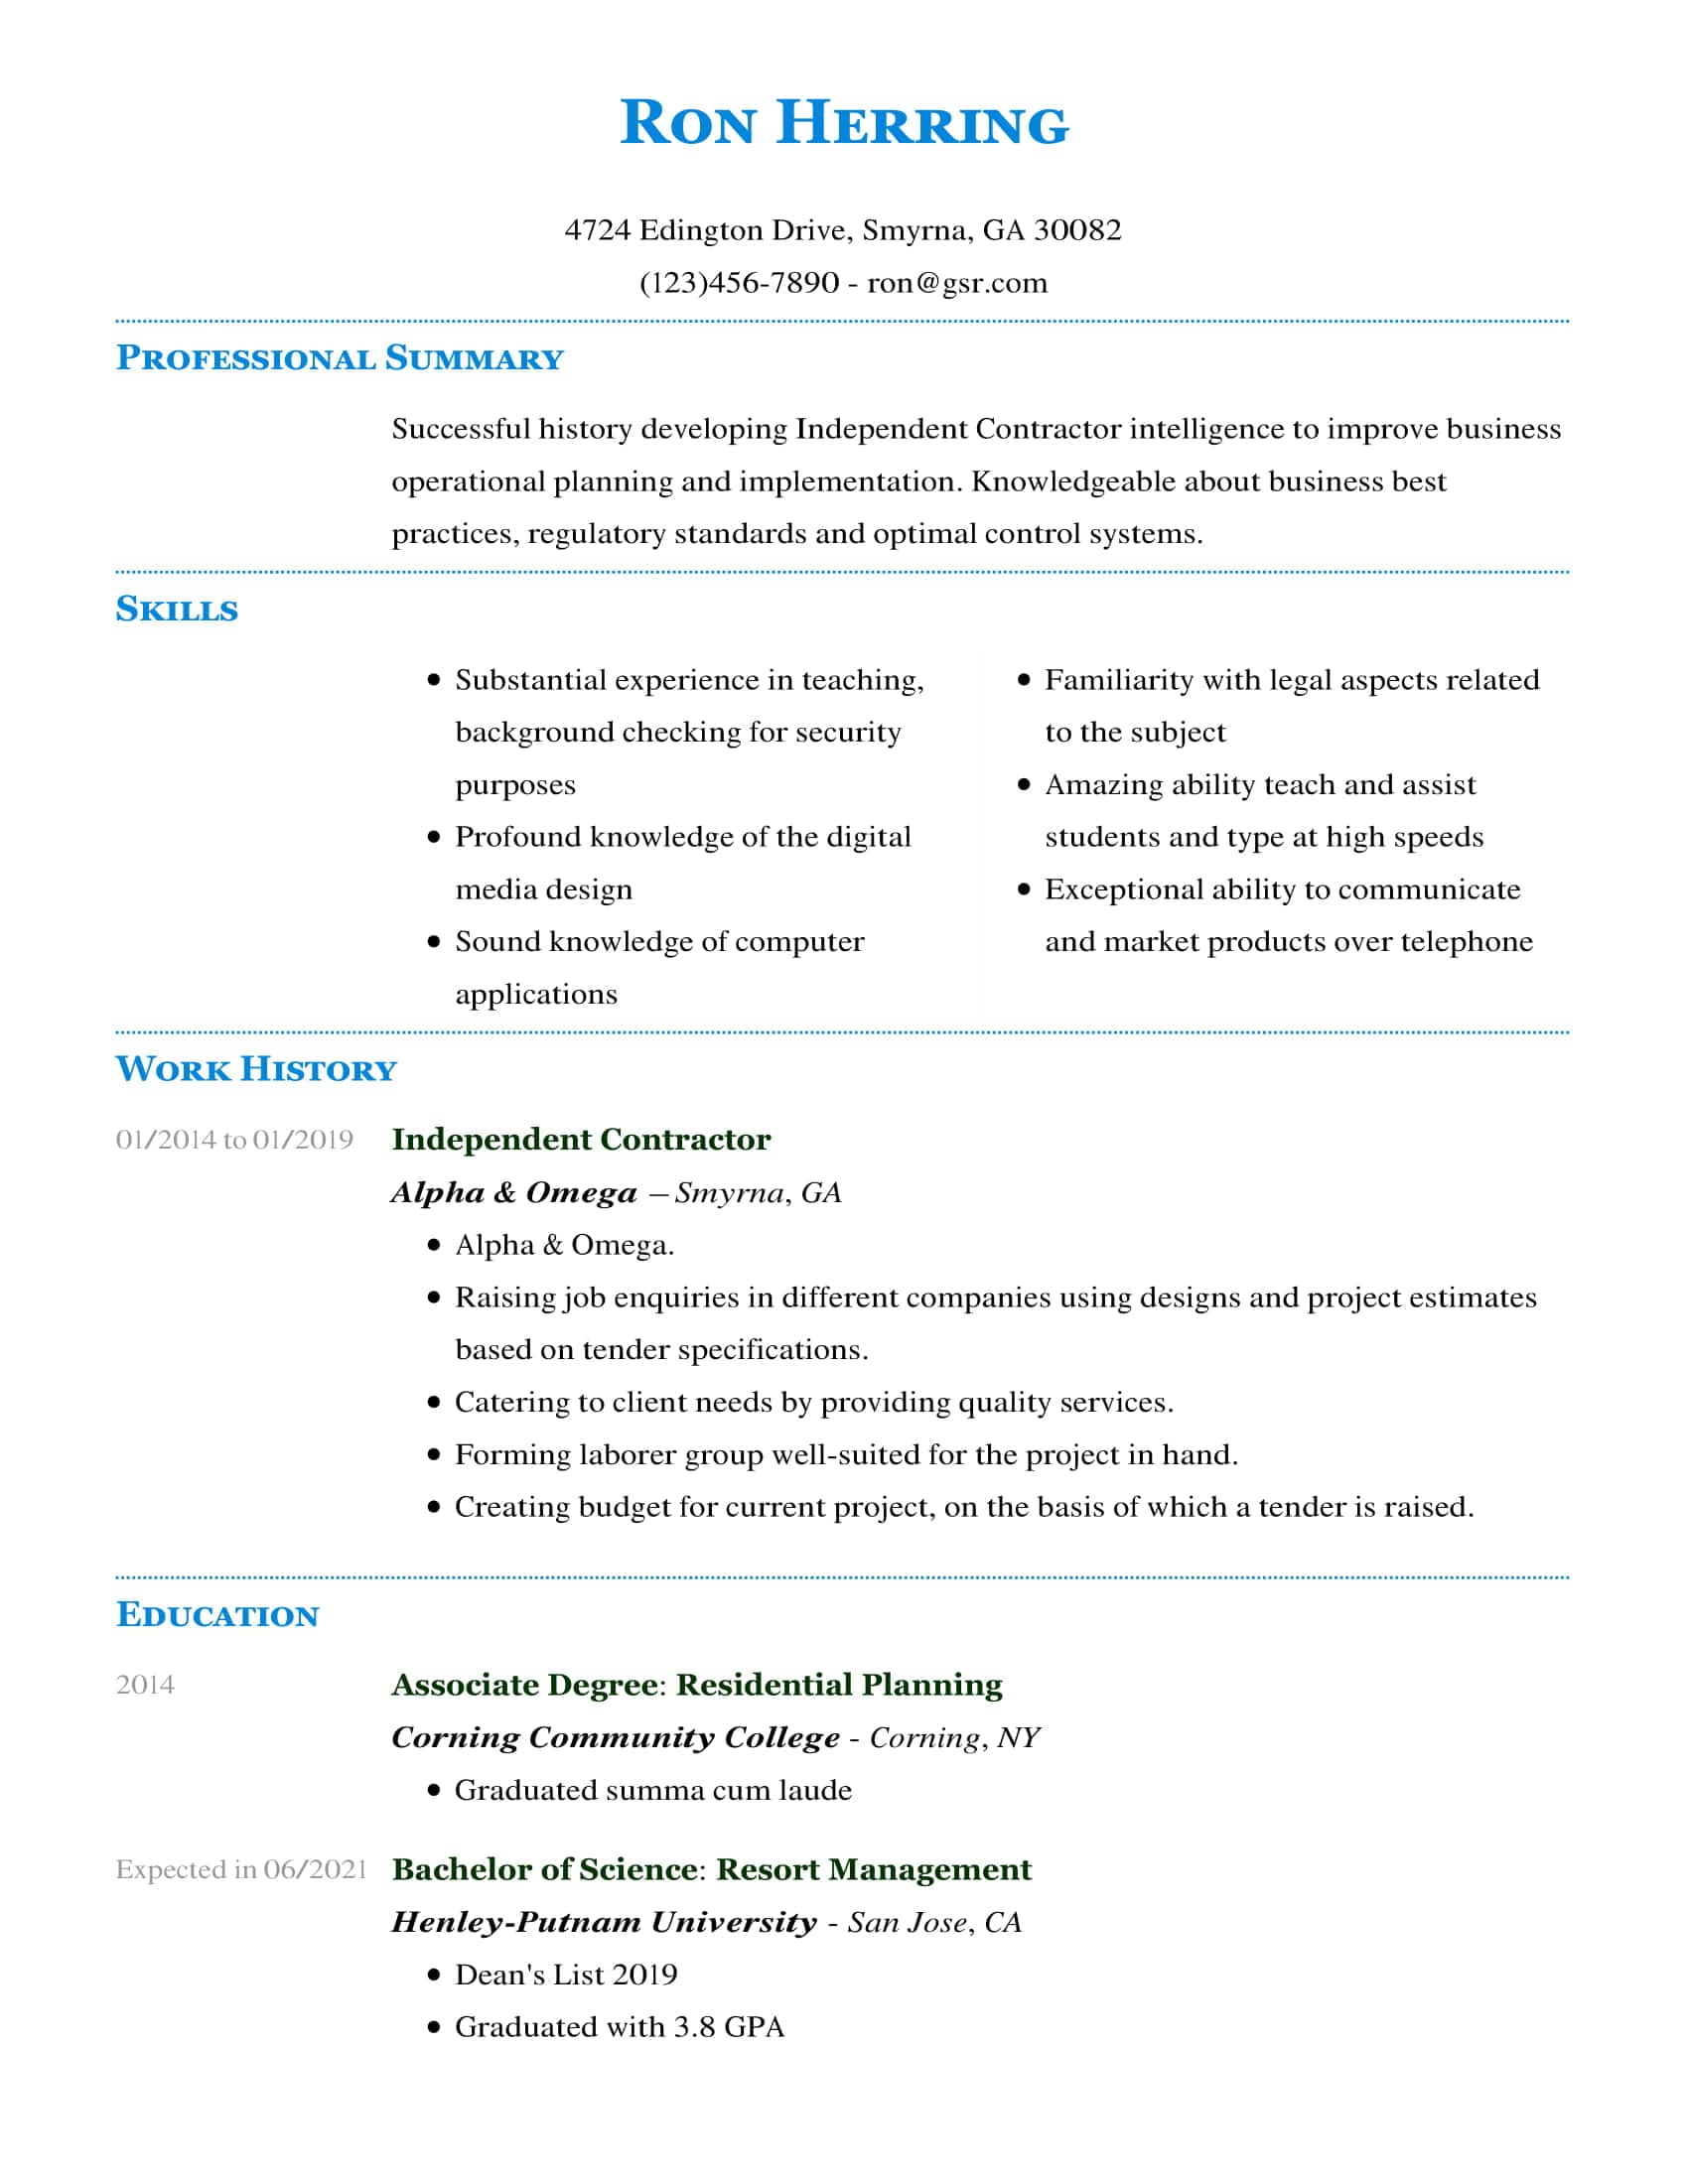 download professional resume template free